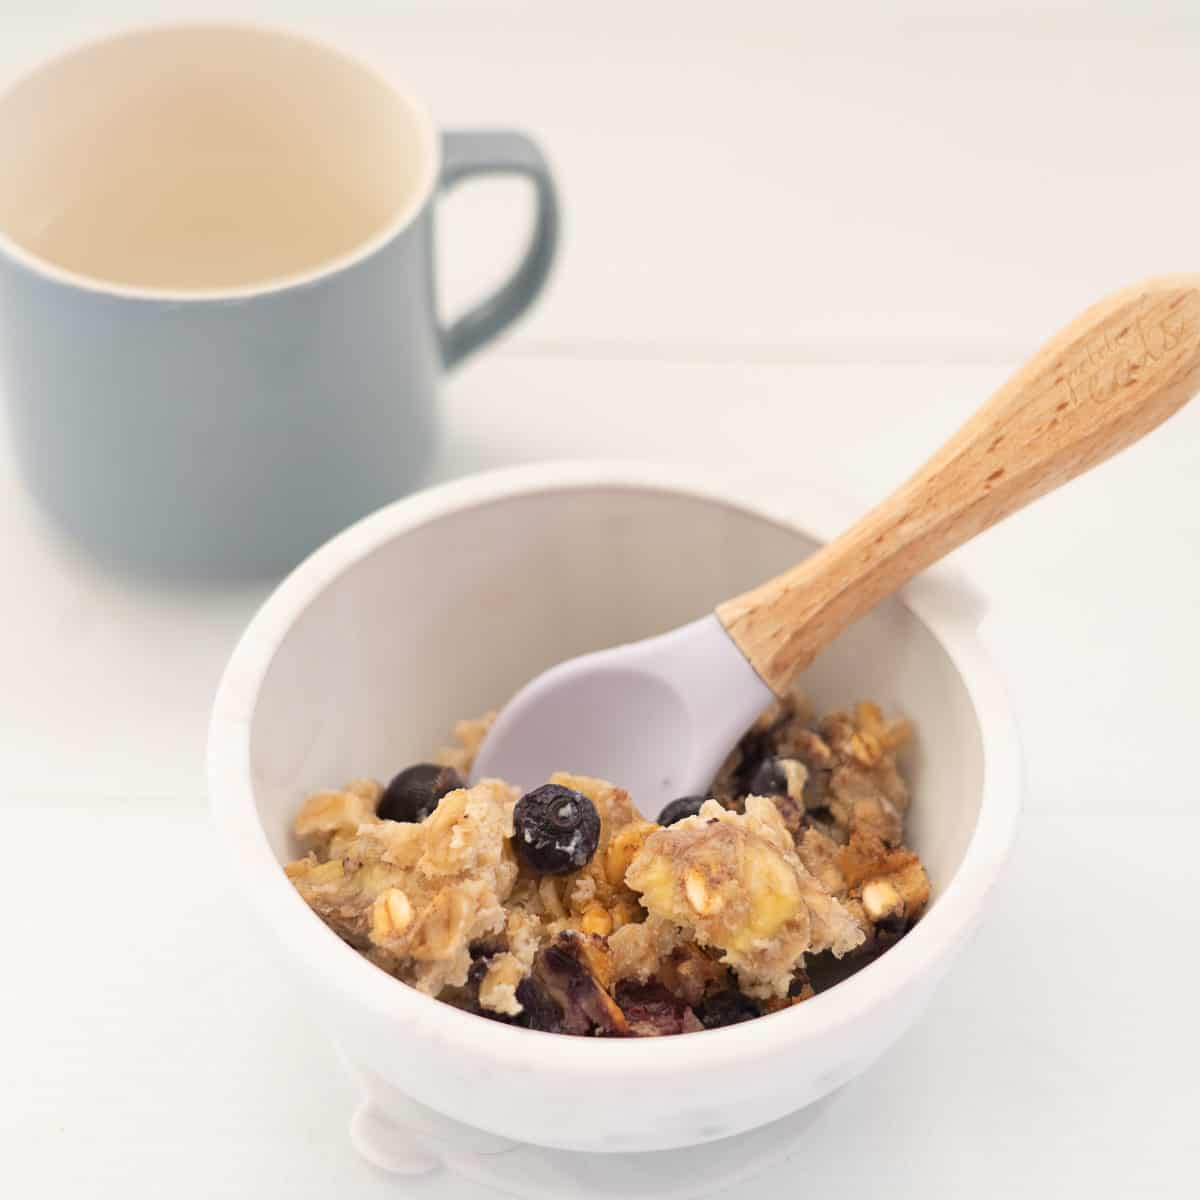 A baby bowl with a silicone spoon filled up with blueberry baked oats.